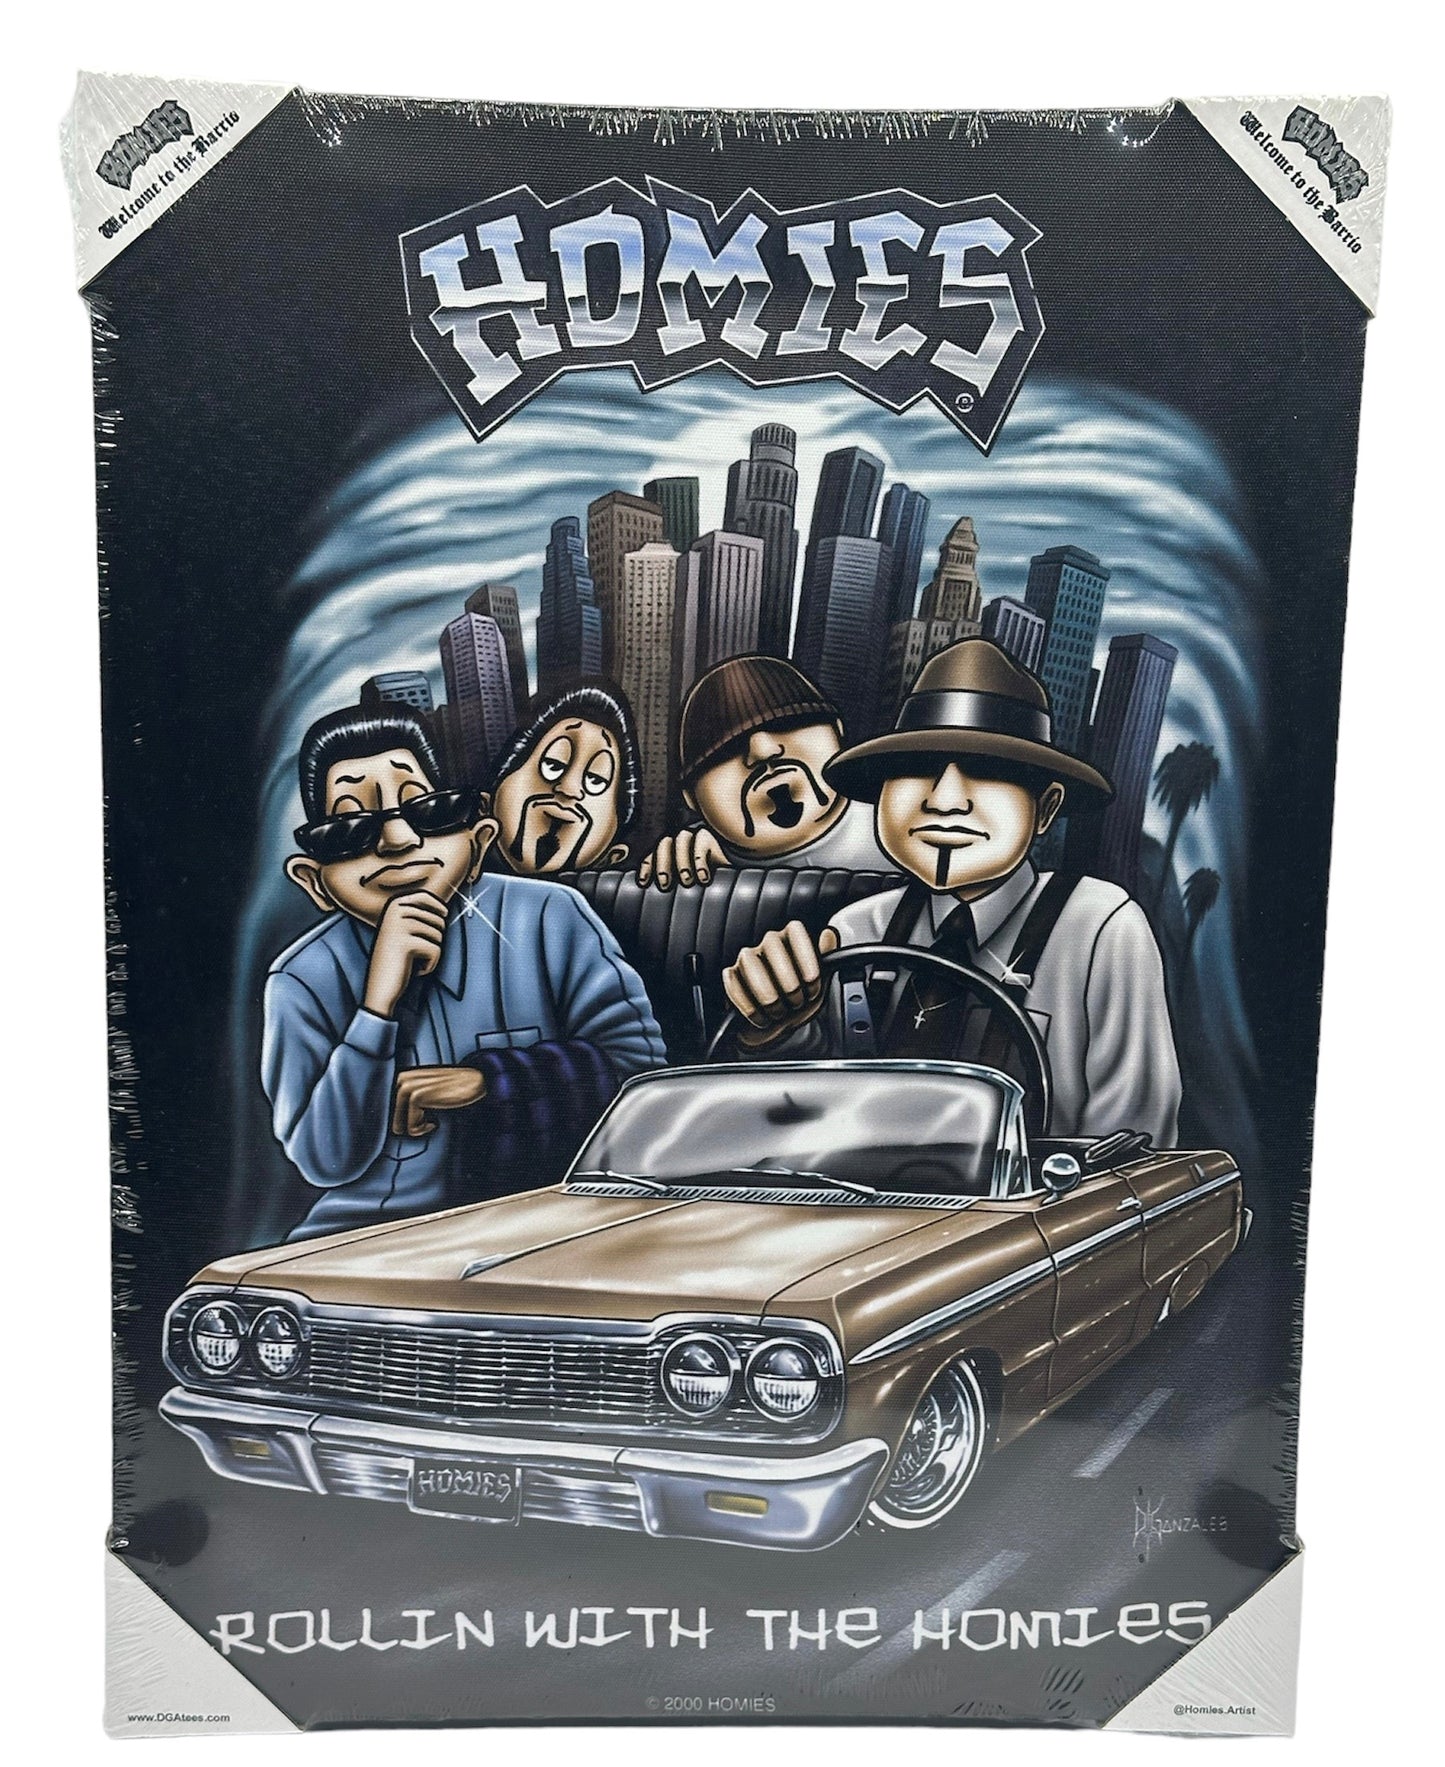 HOMIES - ROLLING WITH THE HOMIES - Small Canvas Art - 12" X 16"